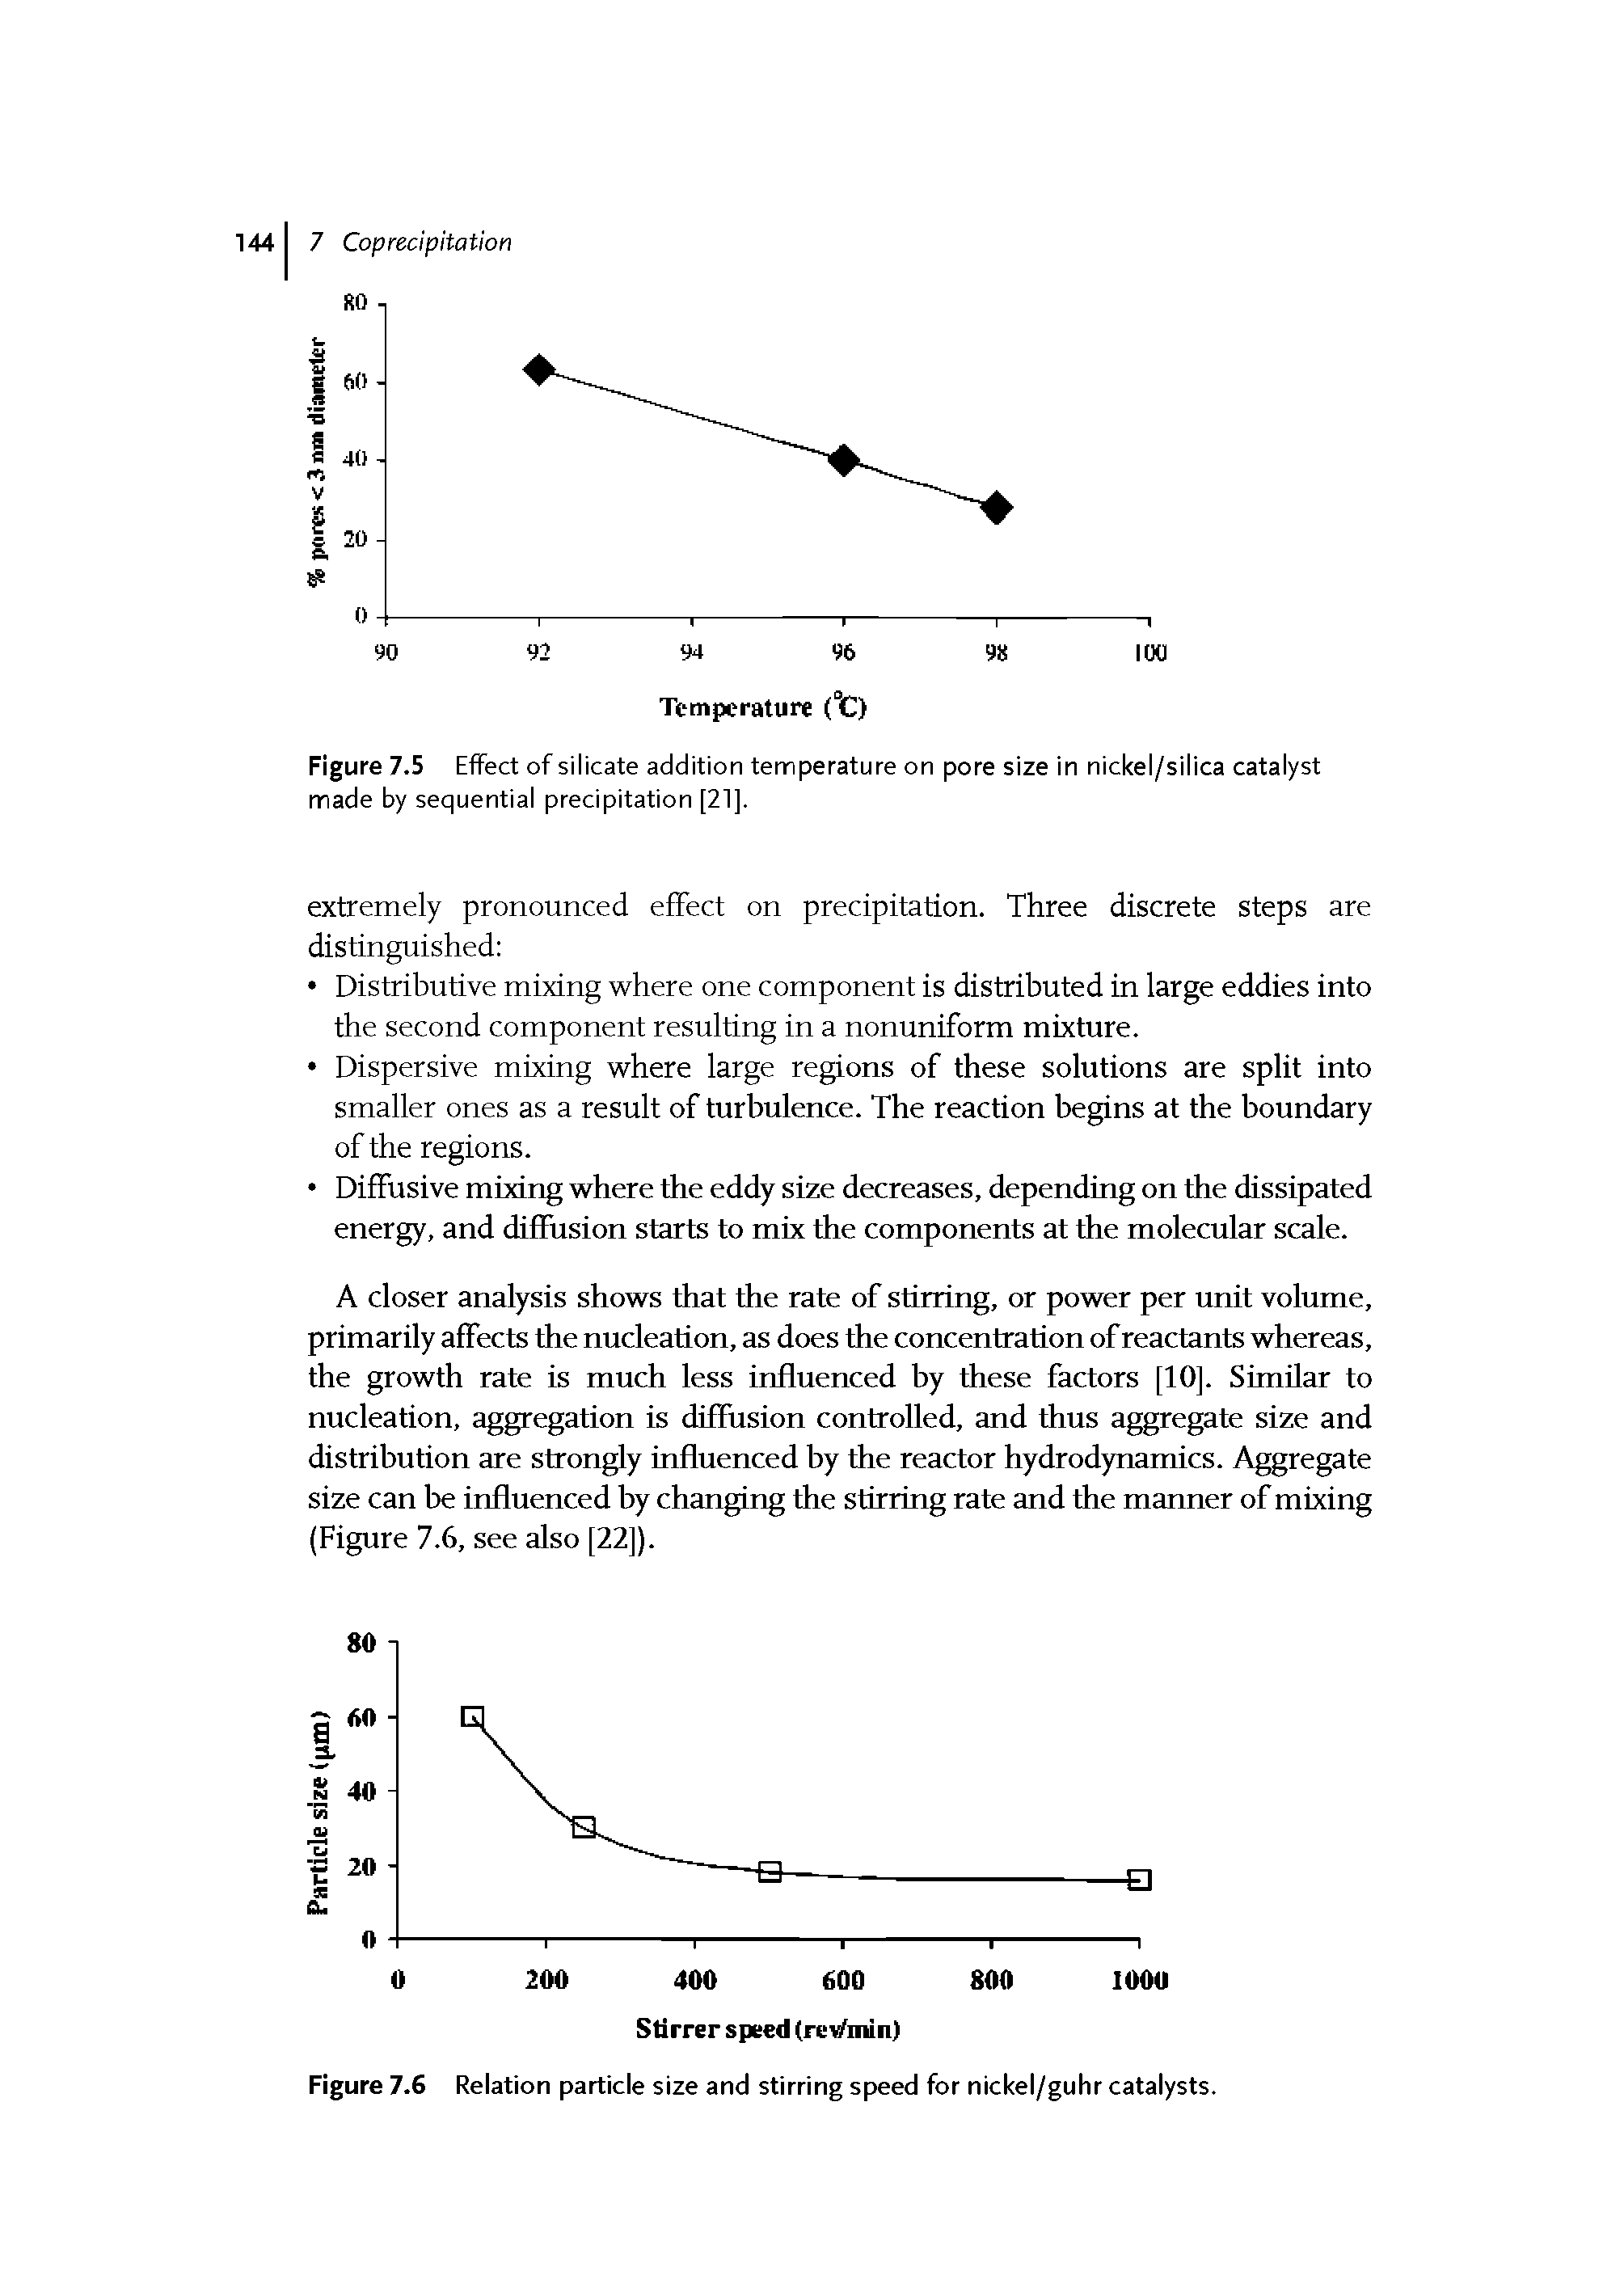 Figure 7.5 Effect of silicate addition temperature on pore size in nickel/silica catalyst made by sequential precipitation [21].